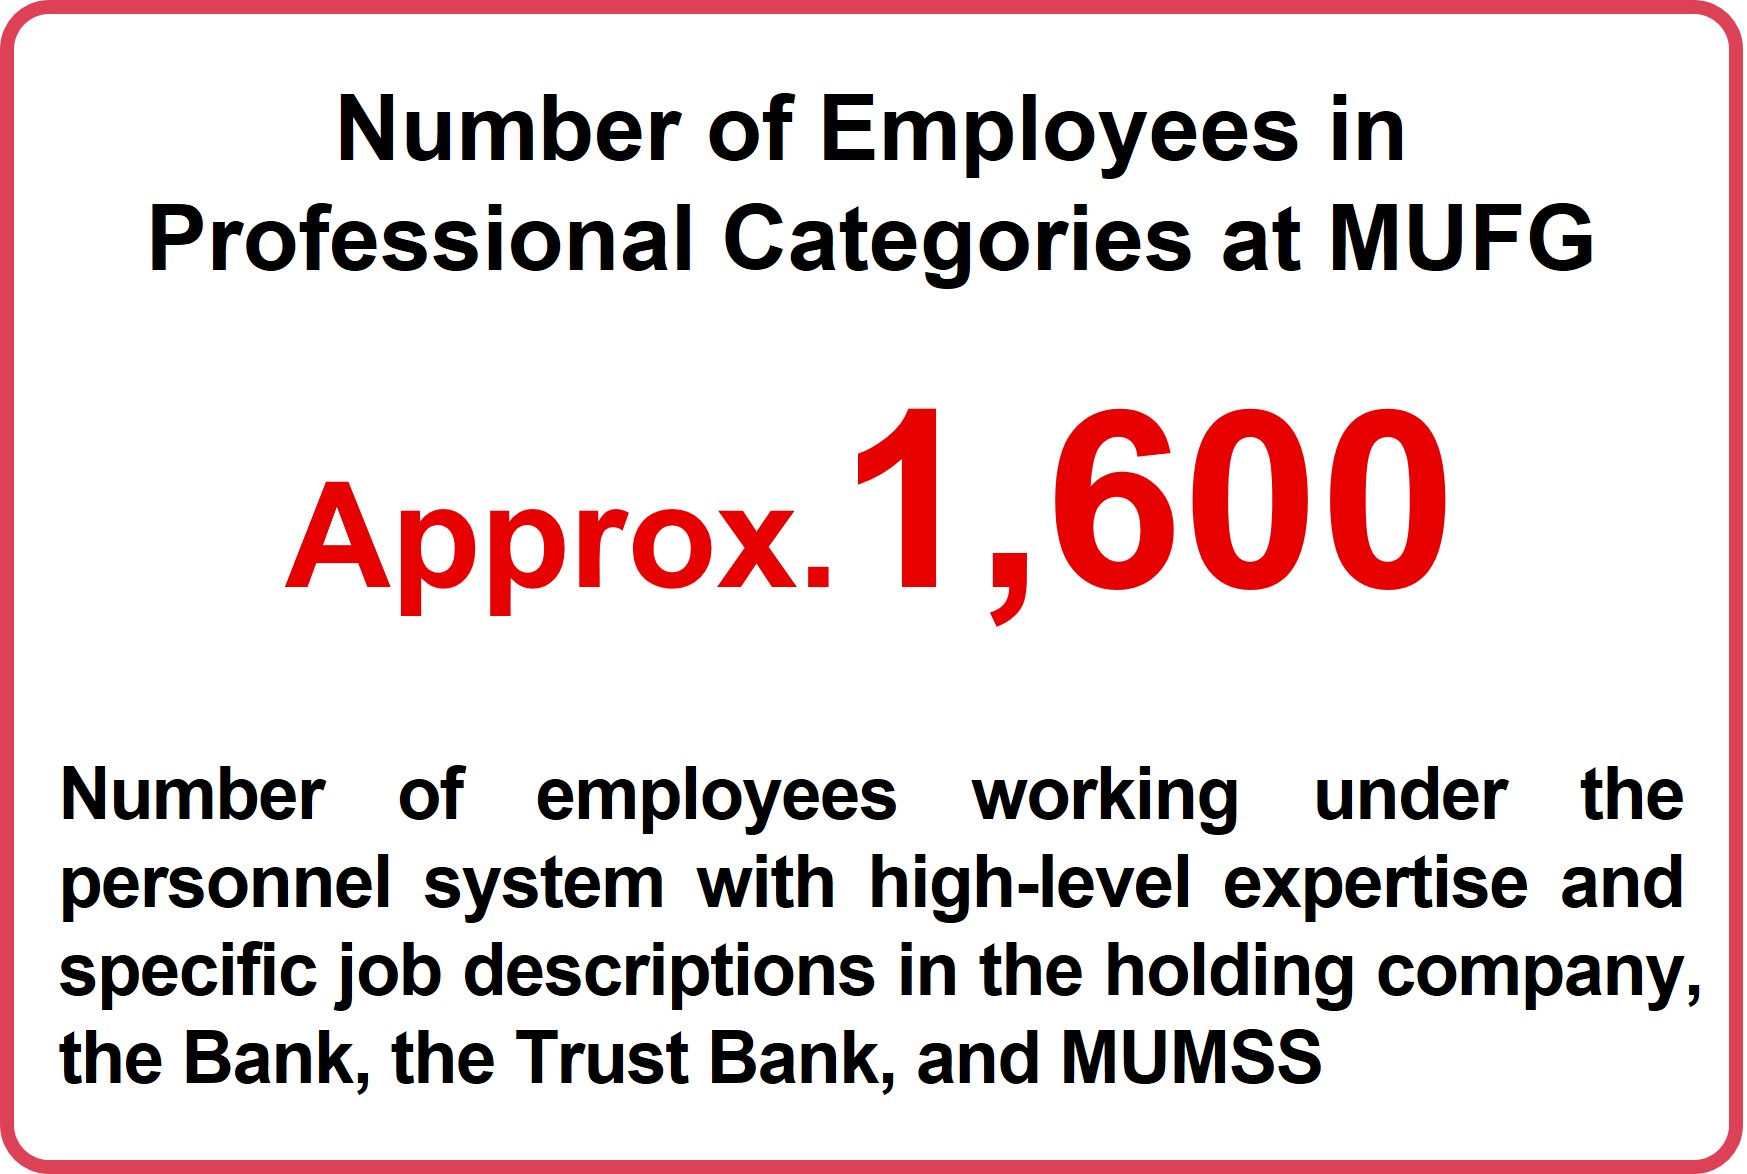 Number of Employees in Professional Categories at MUFG